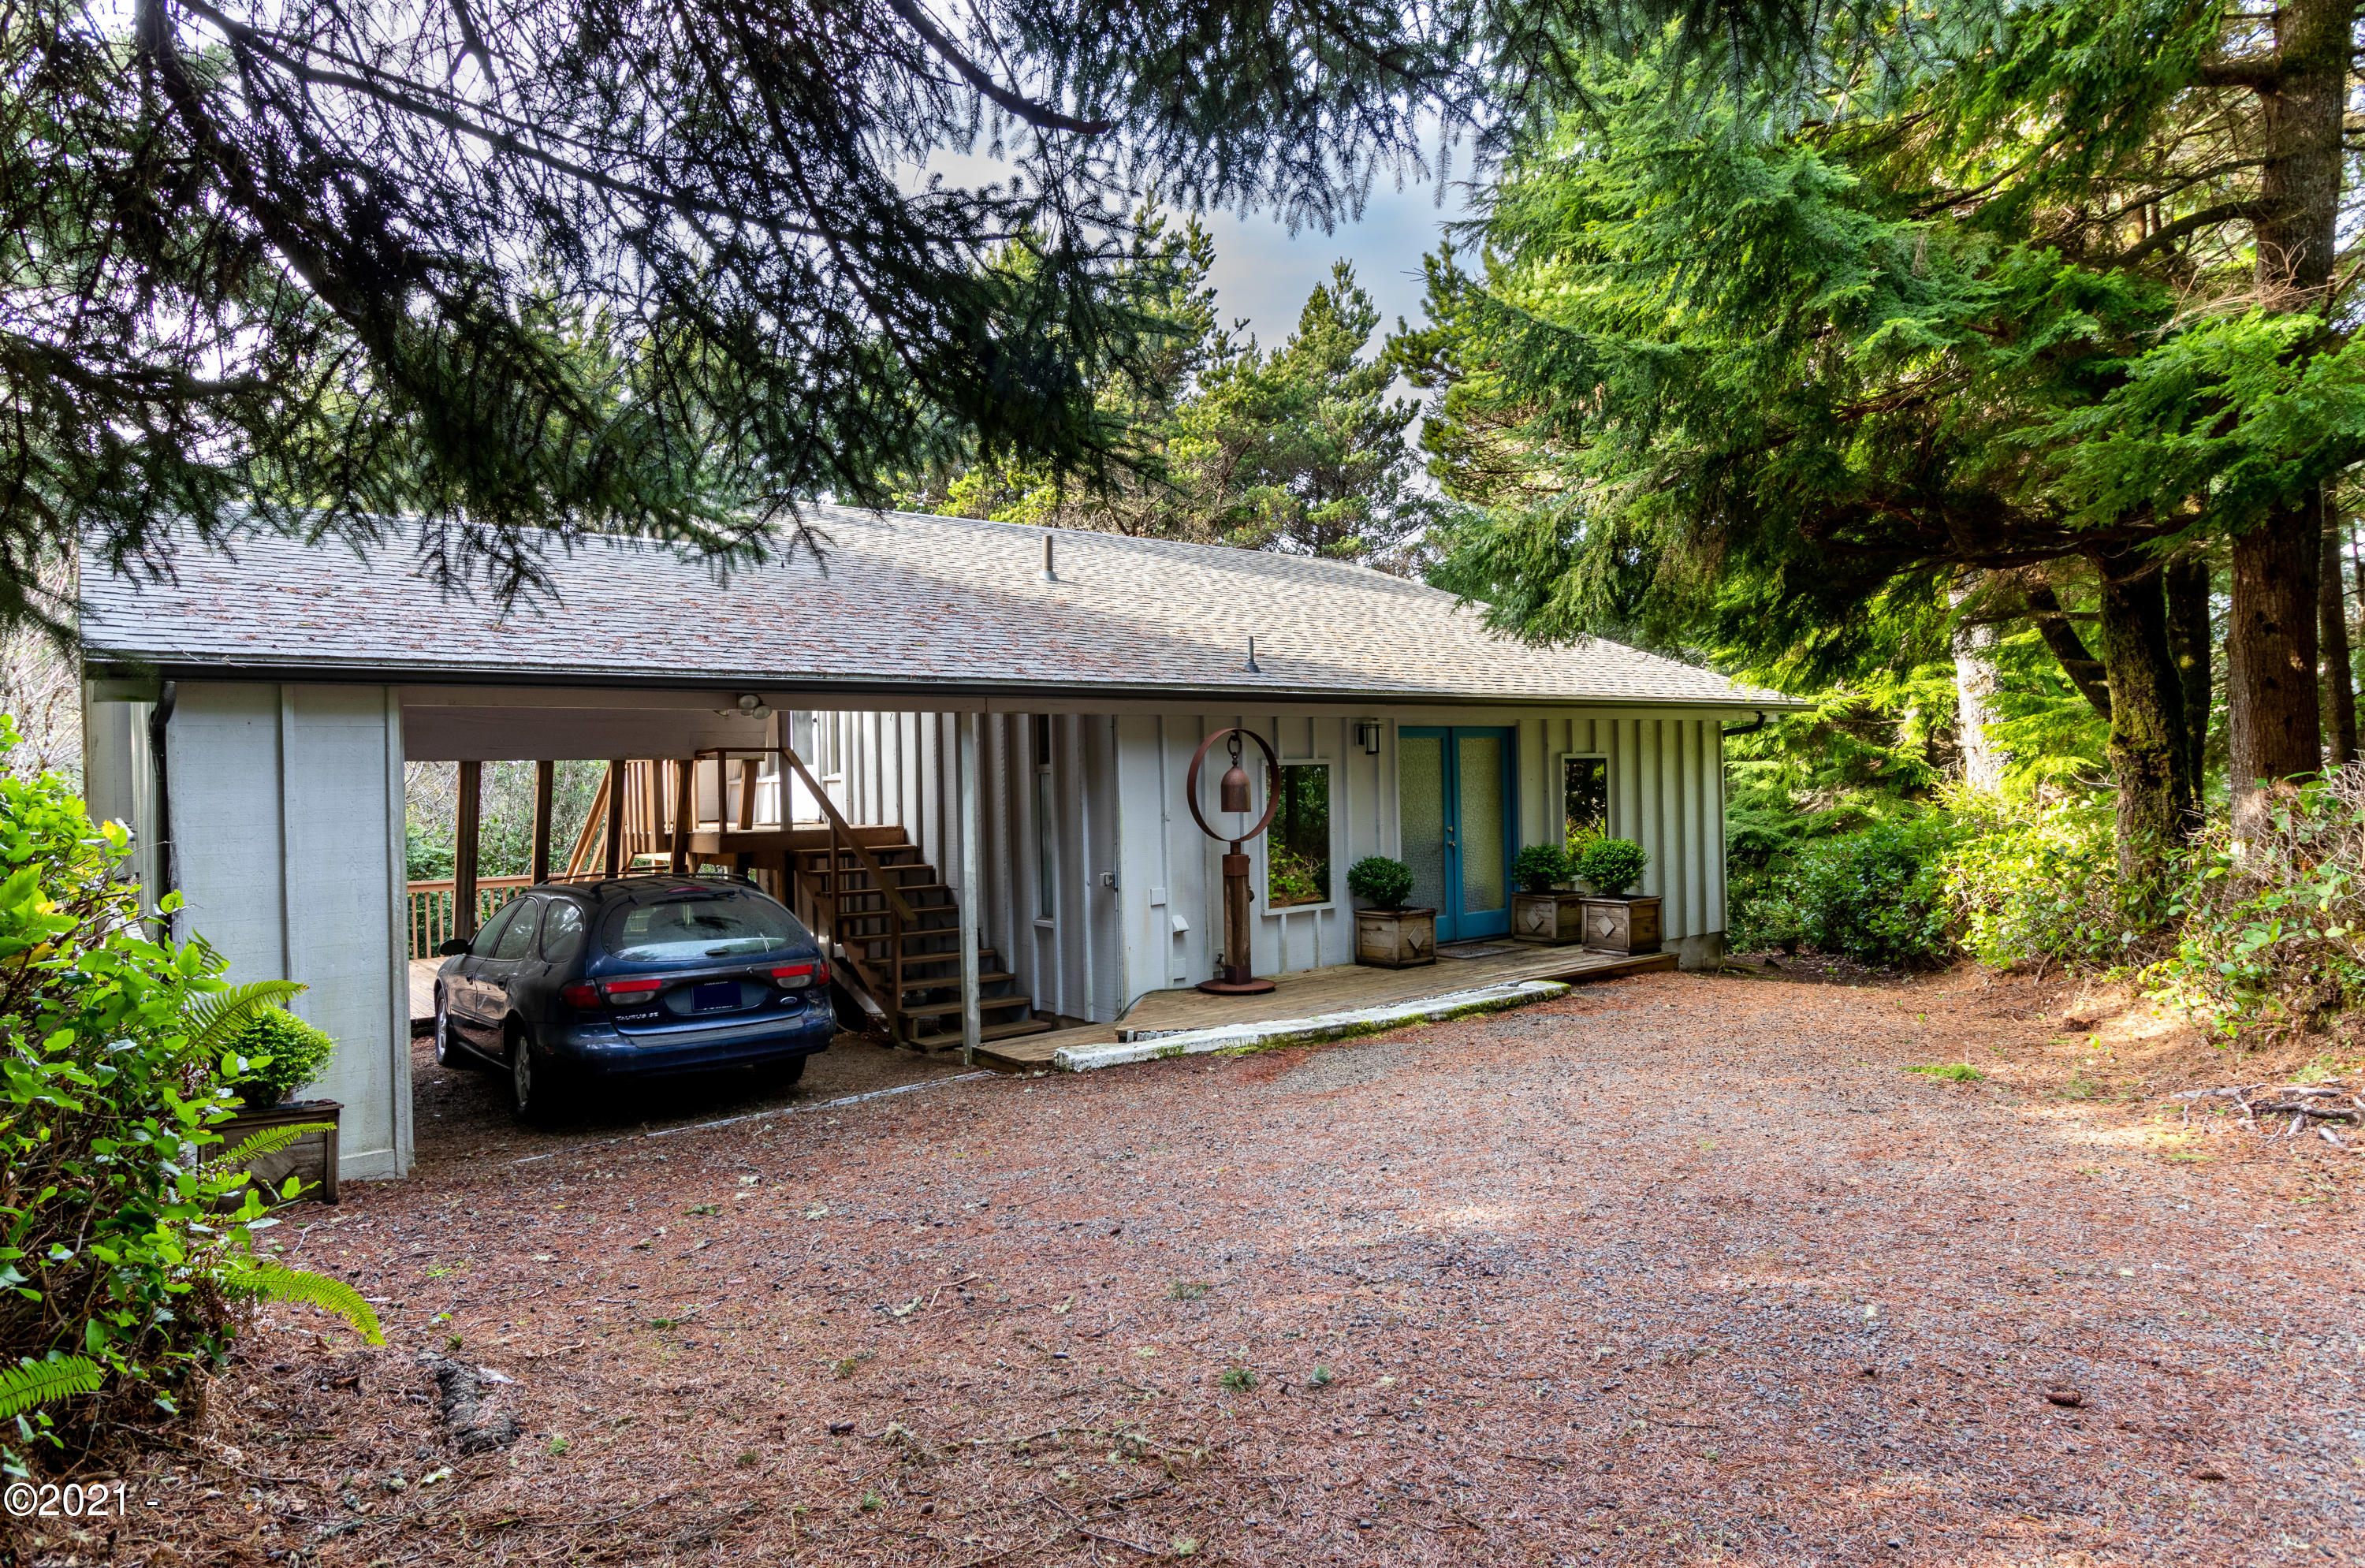 122 Ridge Crest Rd Depoe Bay, Gleneden Beach, Lincoln City, Newport, Otis, Rose Lodge, Seal Rock, Waldport, Yachats, To Home Listings - Amy Plechaty, Emerald Coast Realty Real Estate, homes for sale, property for sale